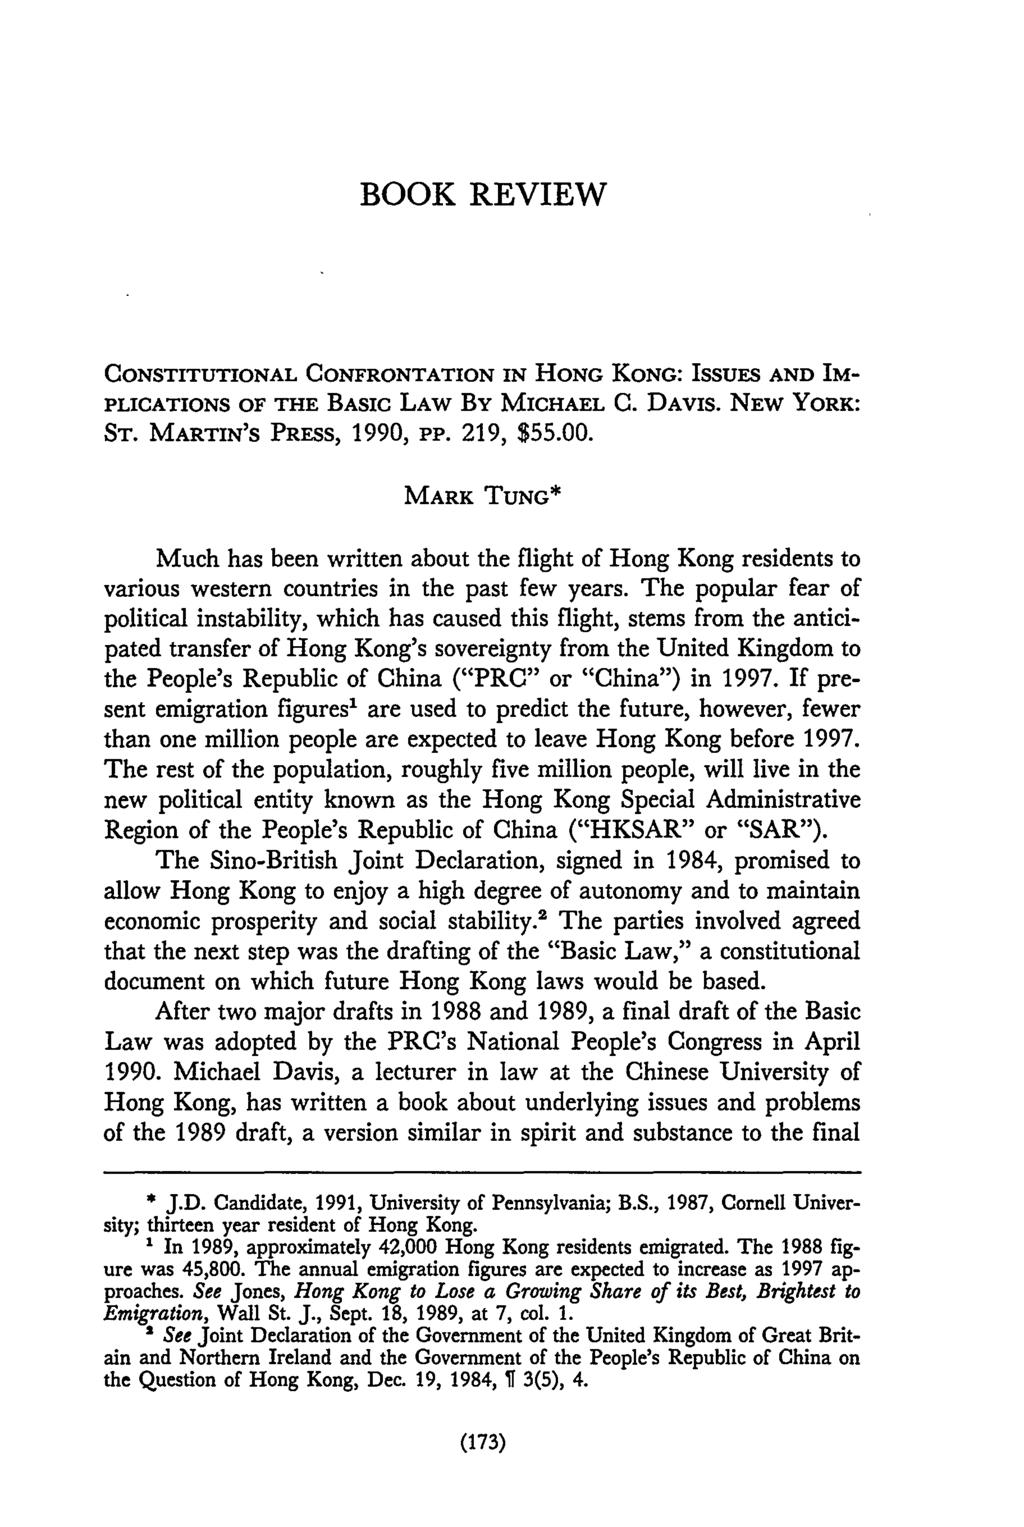 BOOK REVIEW CONSTITUTIONAL CONFRONTATION IN HONG KONG: ISsuES AND IM- PLICATIONS OF THE BASIC LAW By MICHAEL C. DAVIS. NEW YORK: ST. MARTIN'S PRESS, 1990, PP. 219, $55.00.